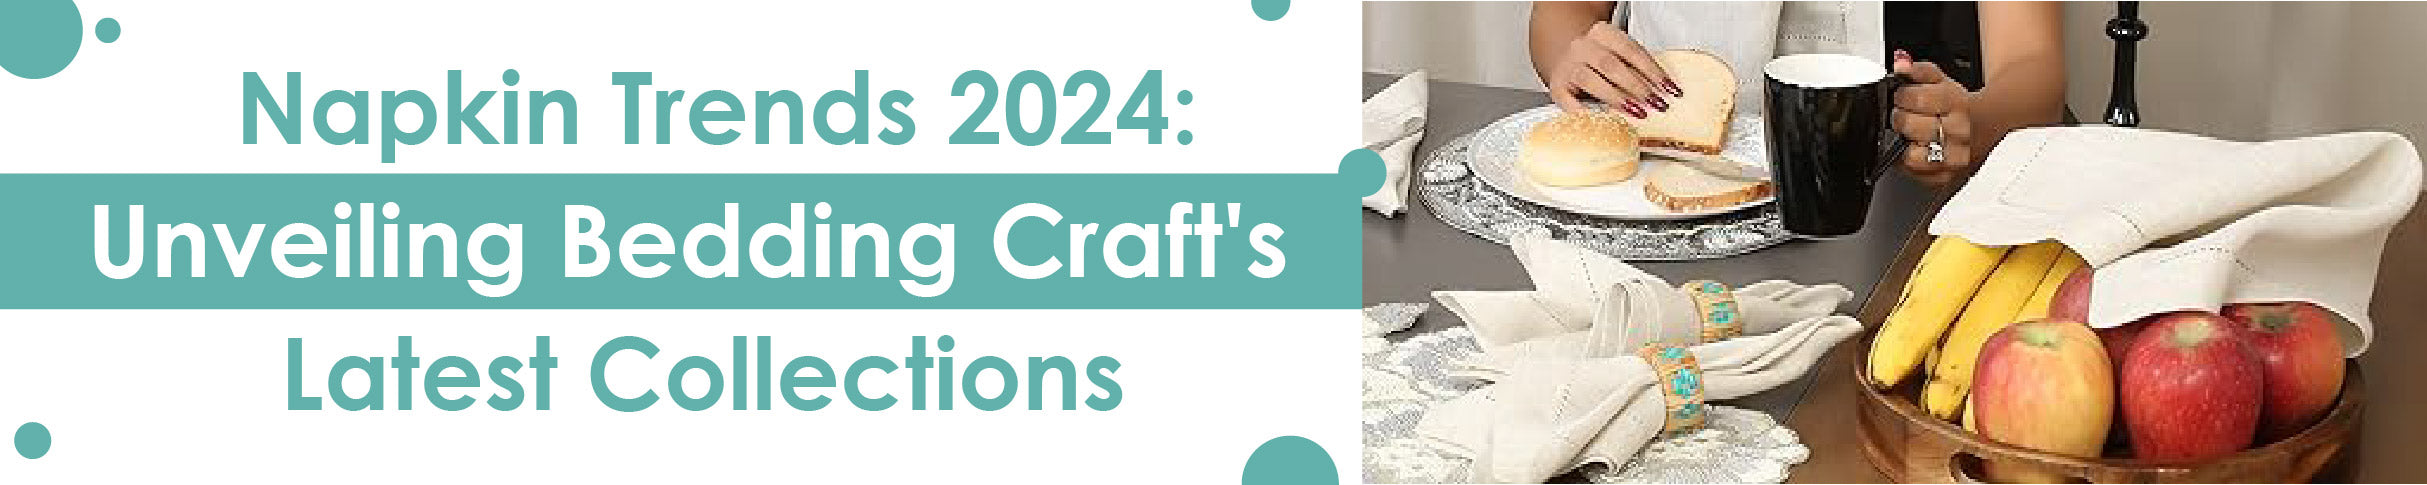 Napkin Trends 2024: Unveiling Bedding Craft's Latest Collections